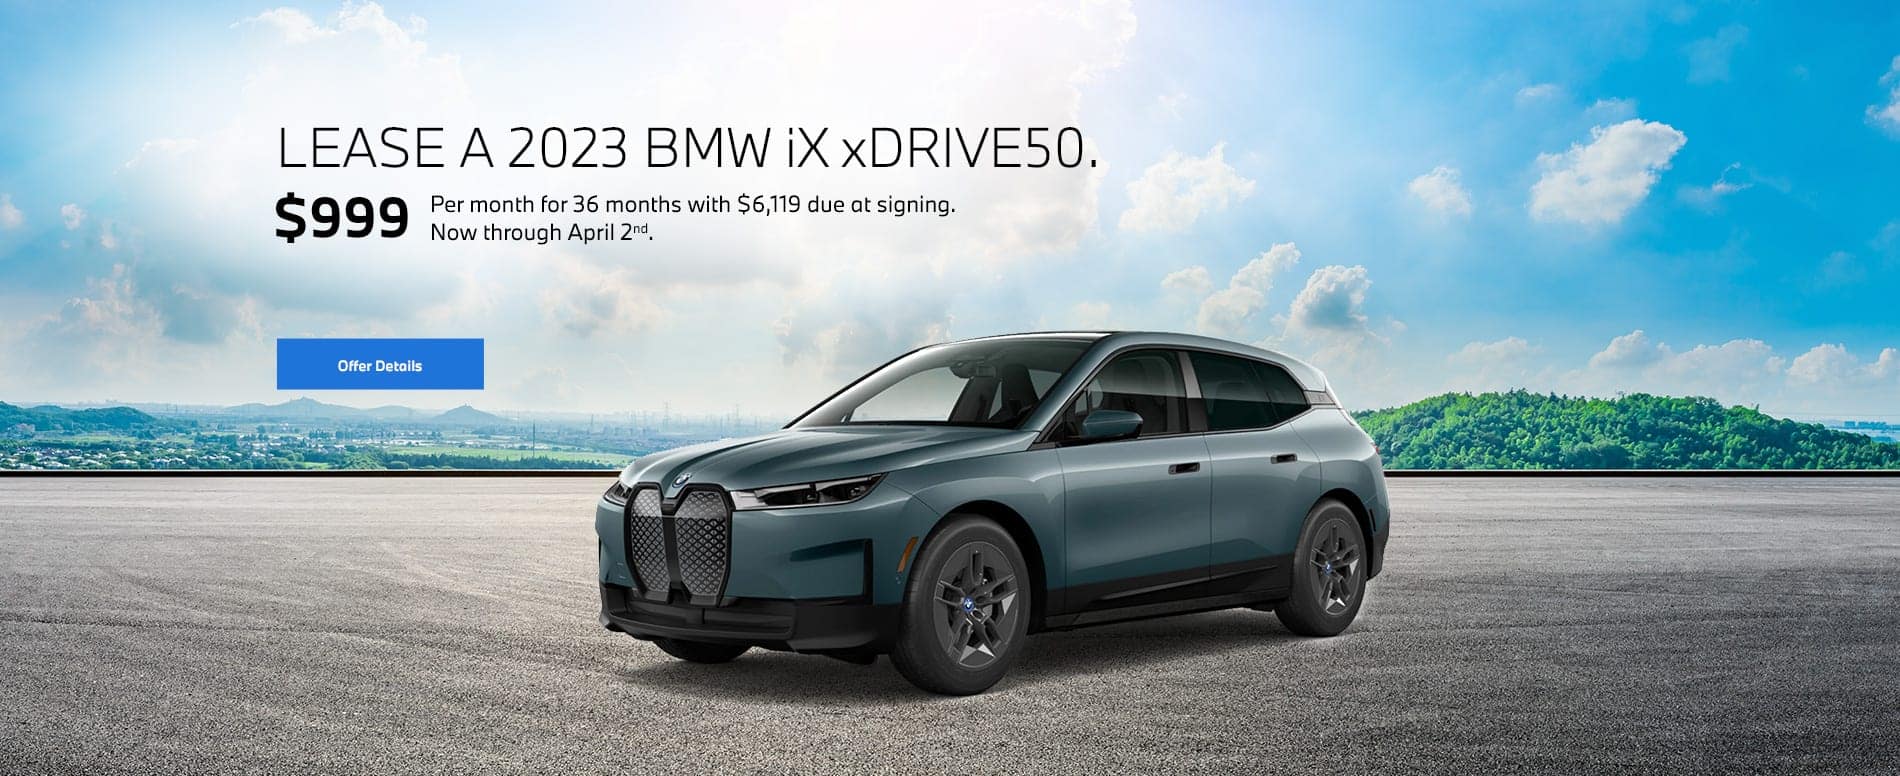 2023 iX lease starting at $999 per month for 36 months